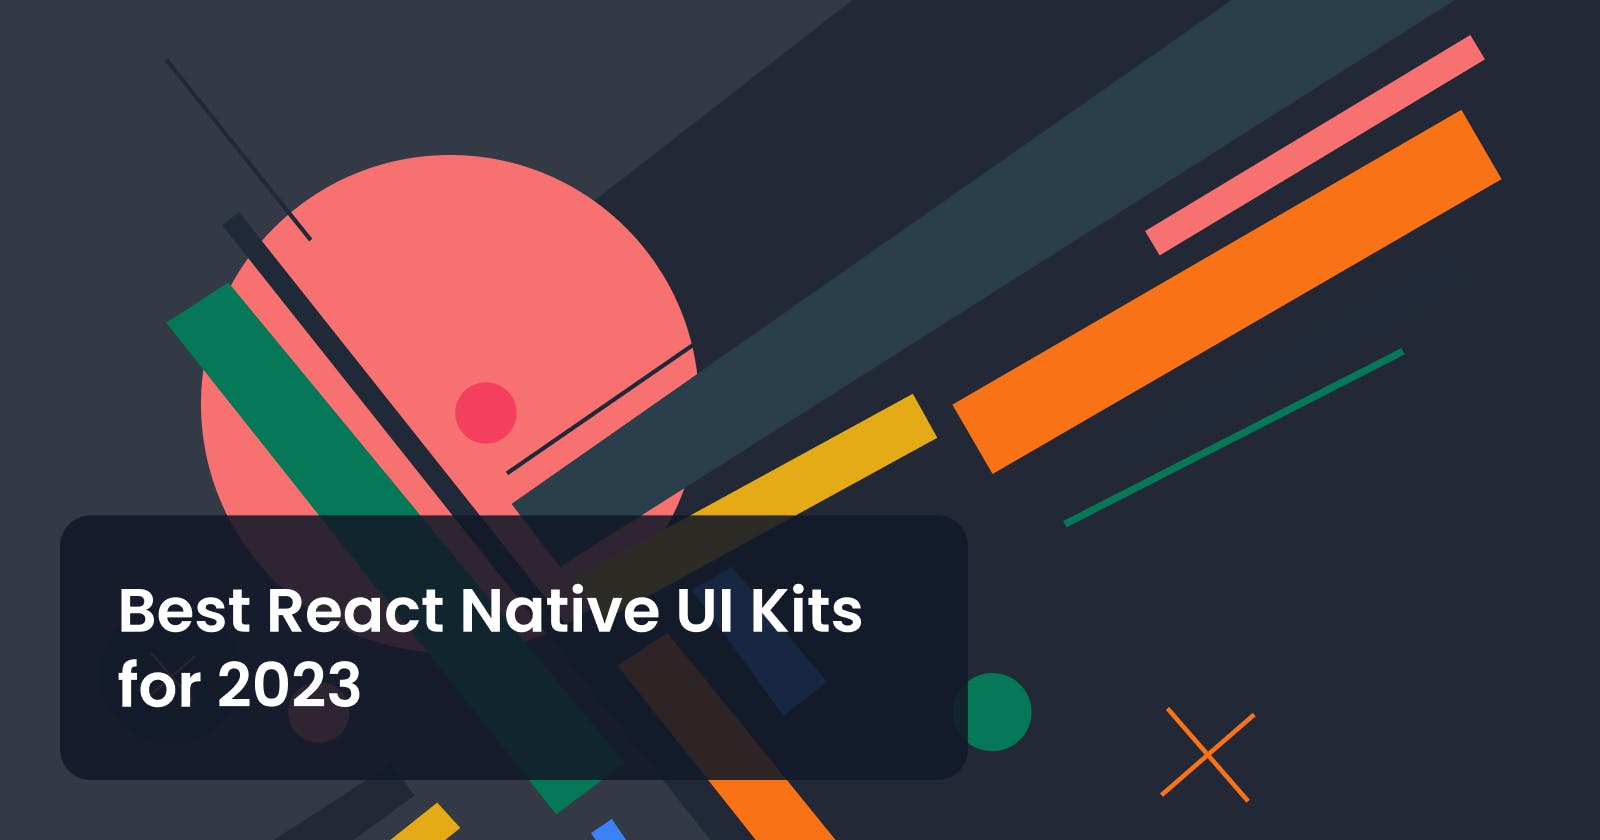 Best React Native UI Kits for 2023